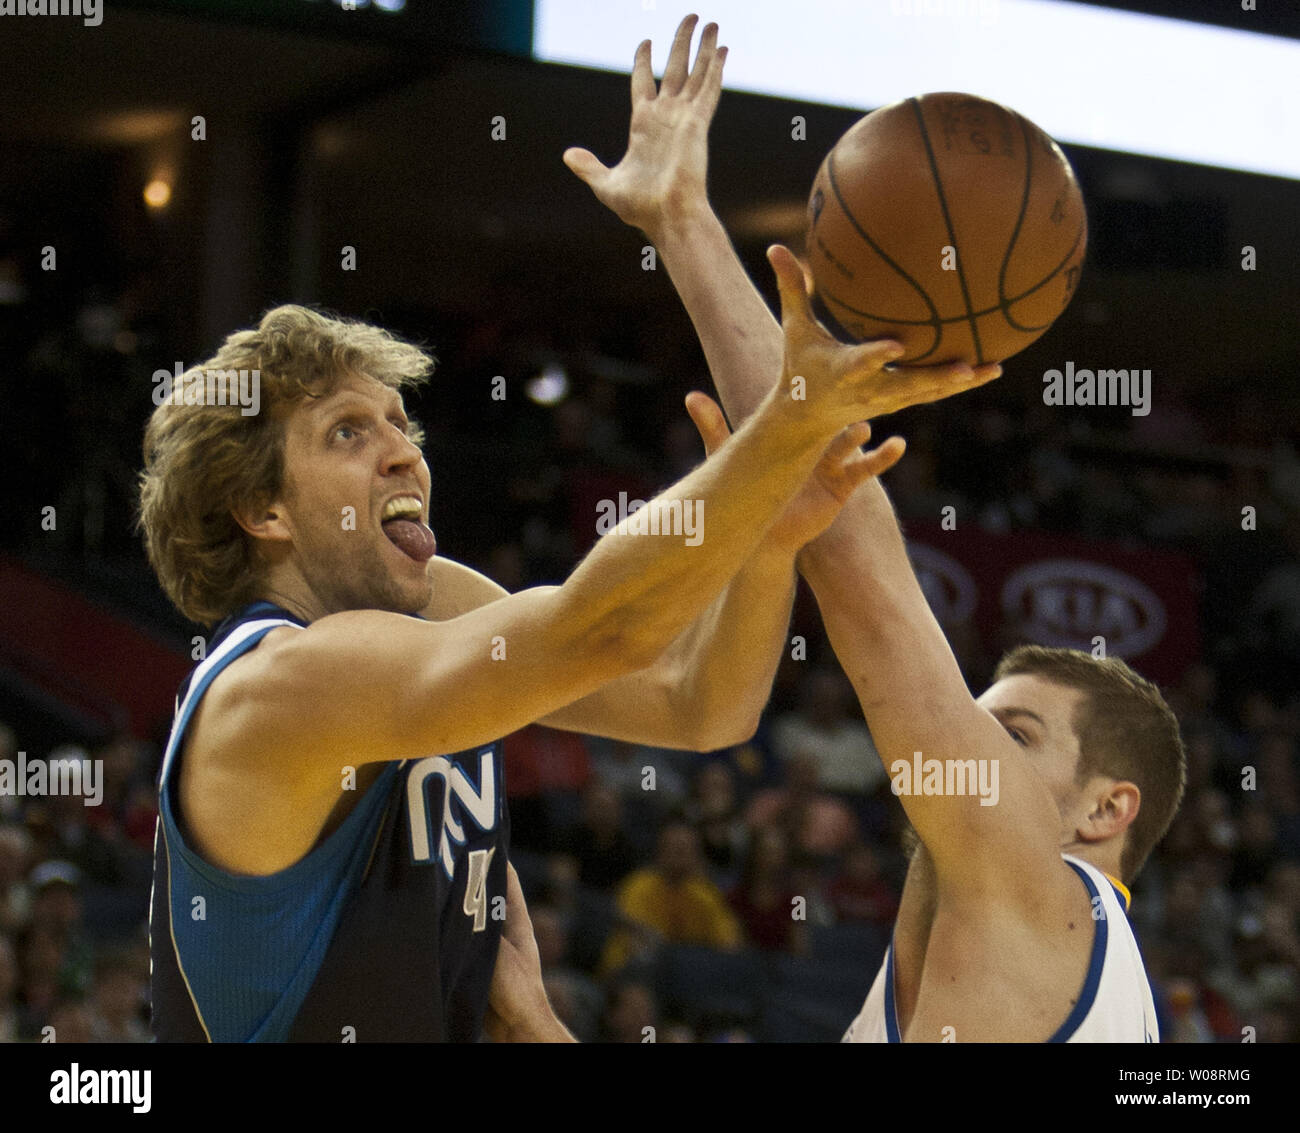 Portland Trail Blazers guard Raymond Felton (5) lays the ball up as he is  pressured by Dallas Mavericks forward Dirk Nowitzki (41), of Germany,  during overtime of an NBA basketball game on